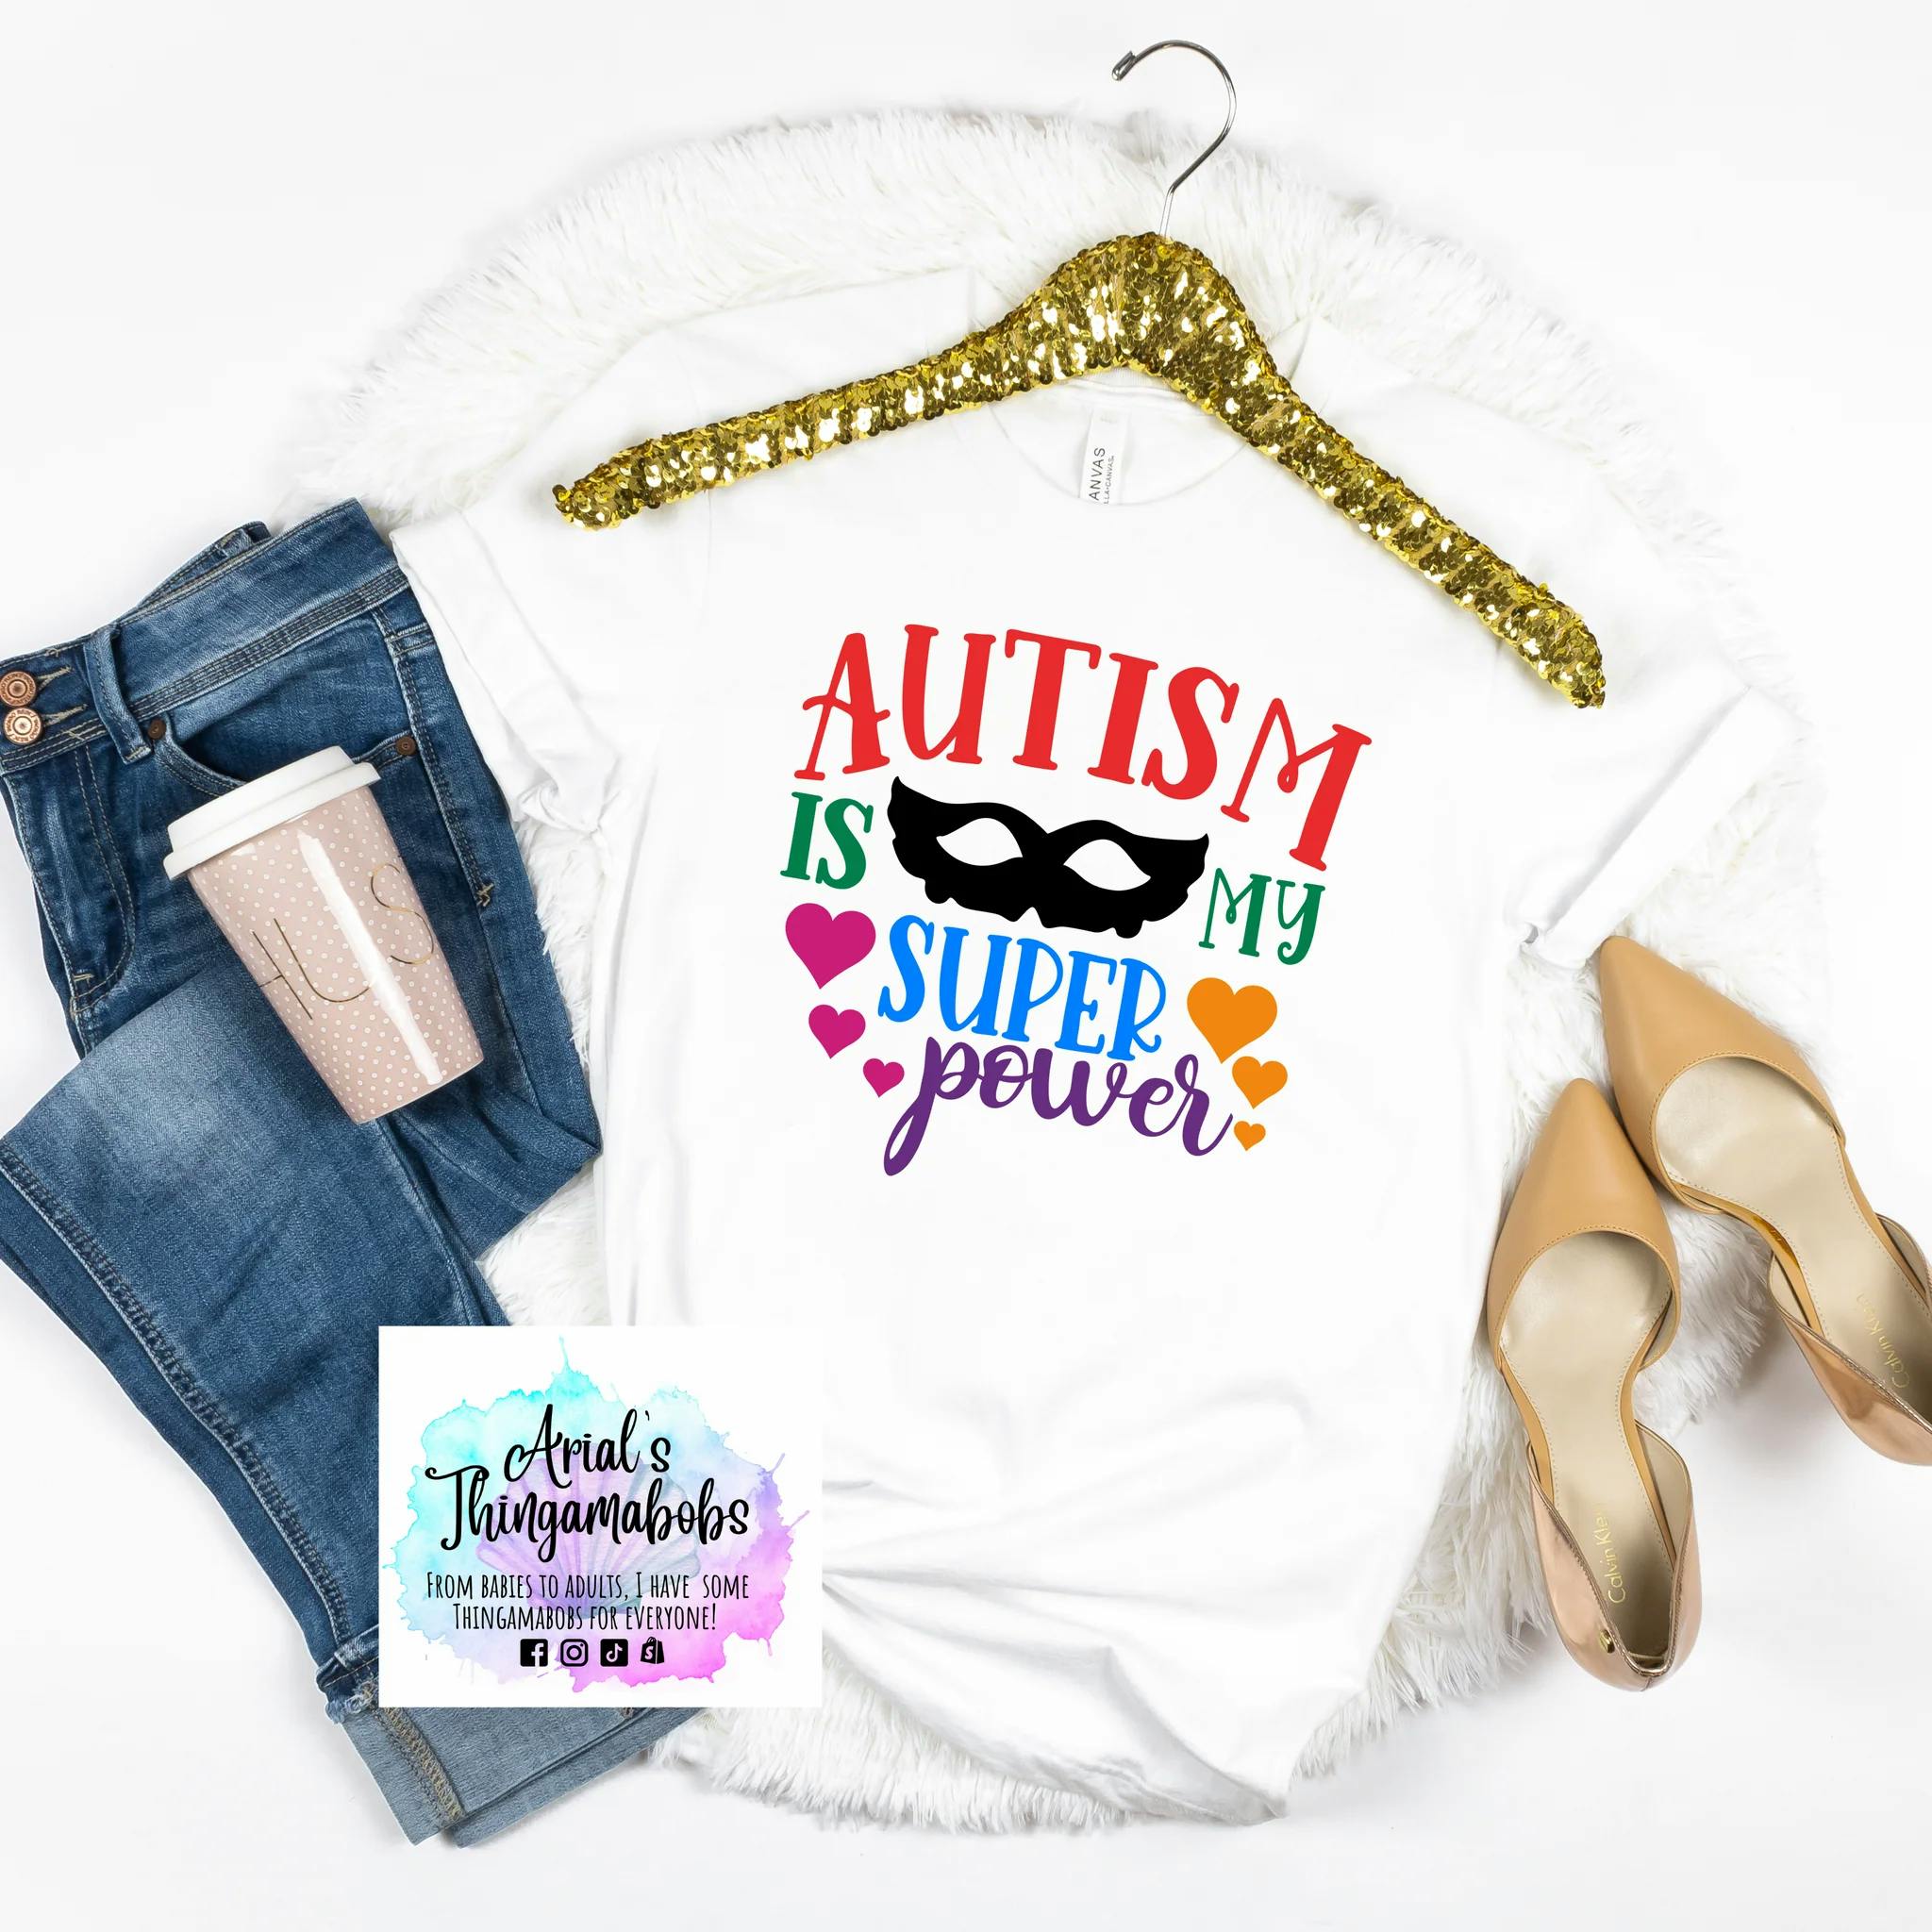 Autism Rocks and Rolls t-shirt. Displays the text  "Autism is my Superpower" in colorful lettering. In the center of the text is a superhero's mask.